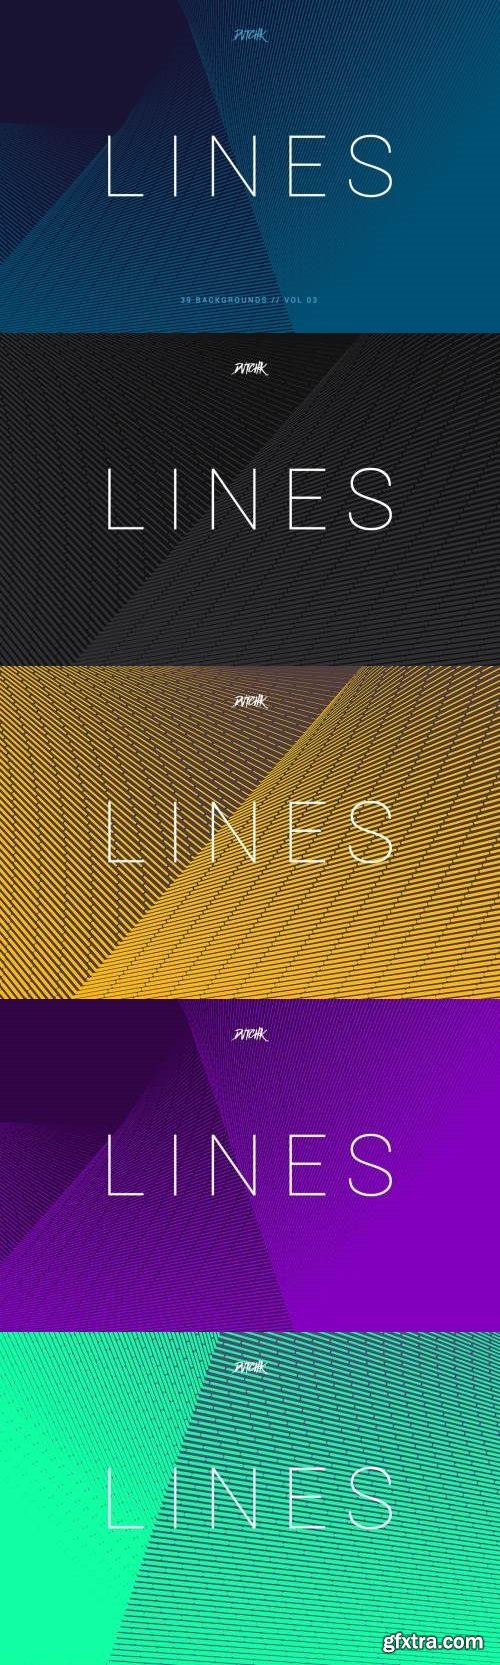 Lines | Abstract Stripes Backgrounds | Vol. 03